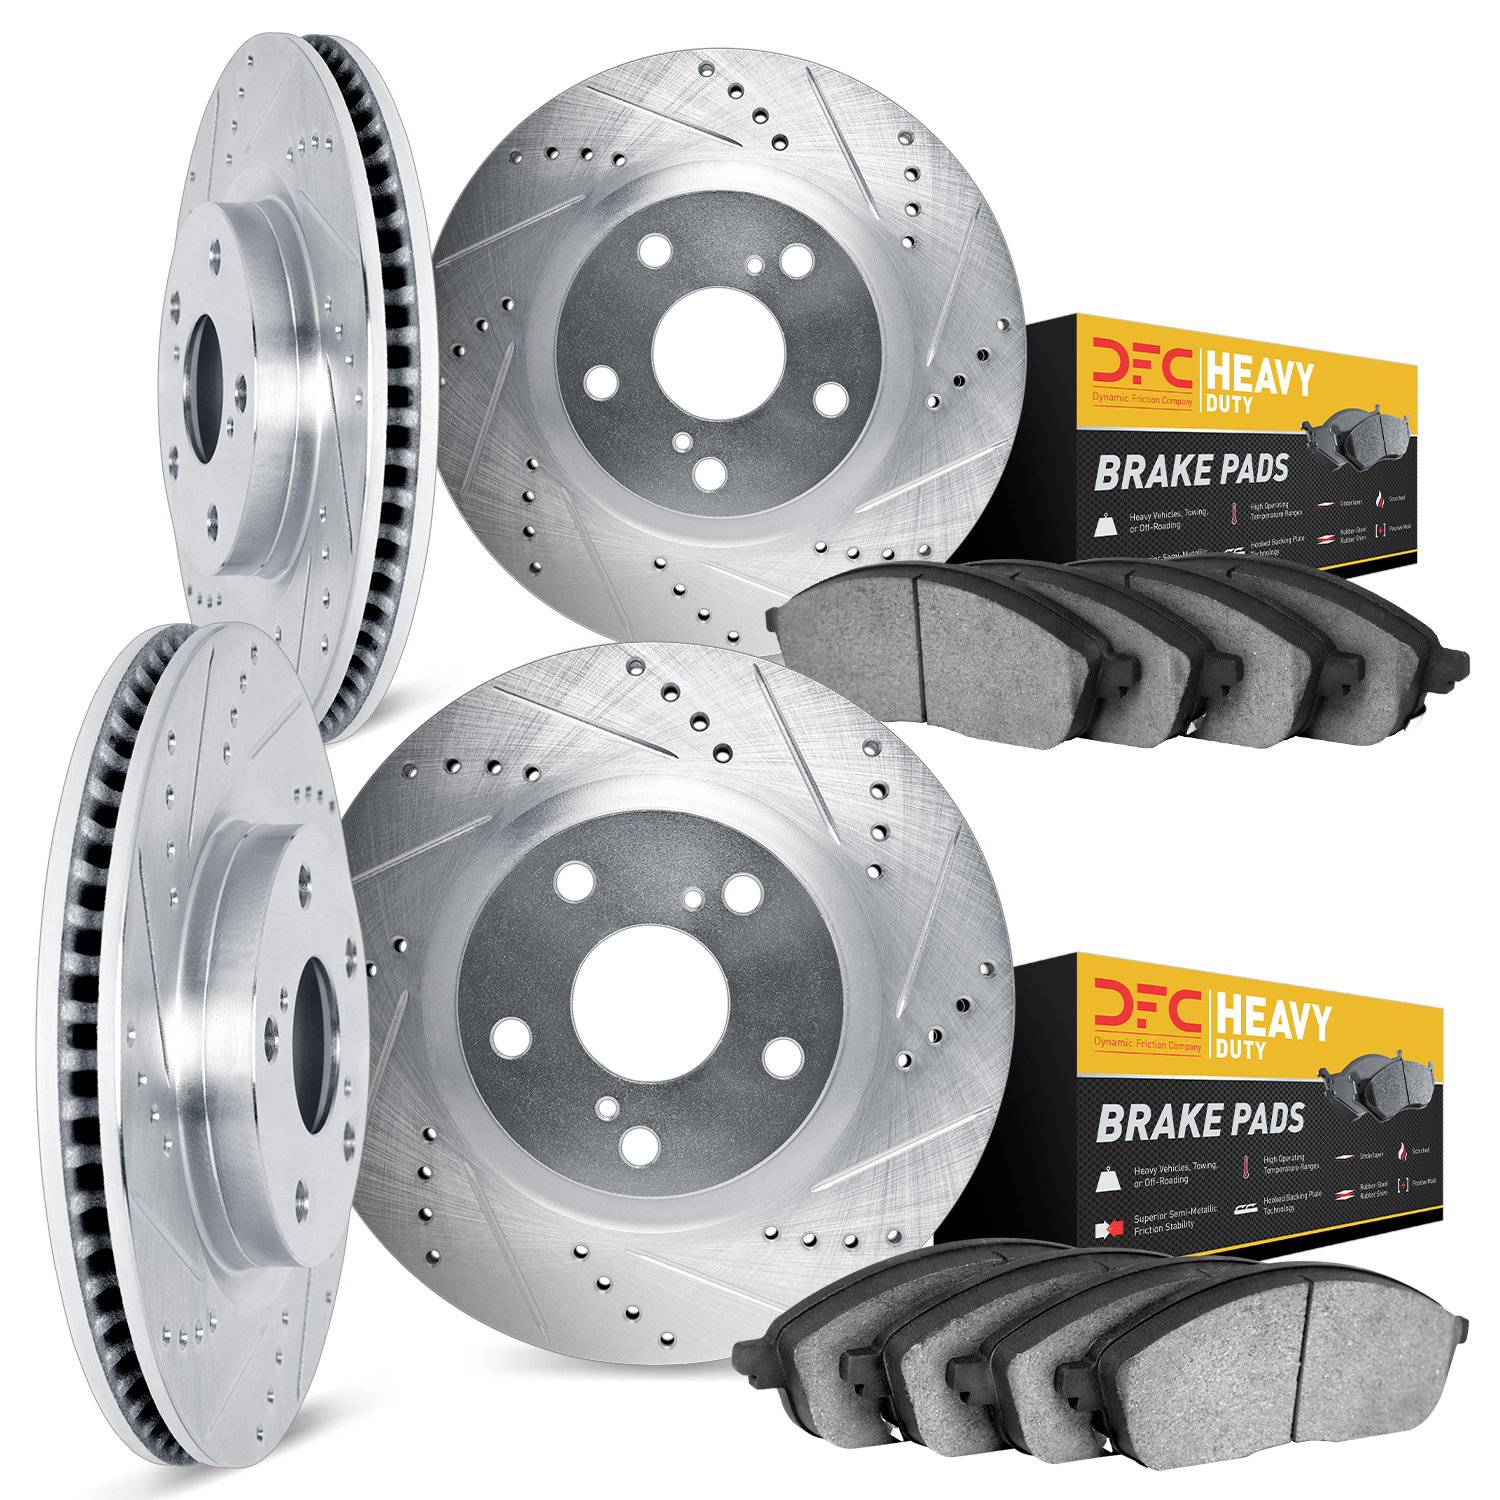 7204-48057 Drilled/Slotted Rotors w/Heavy-Duty Brake Pads Kit [Silver], 1997-2005 GM, Position: Front and Rear